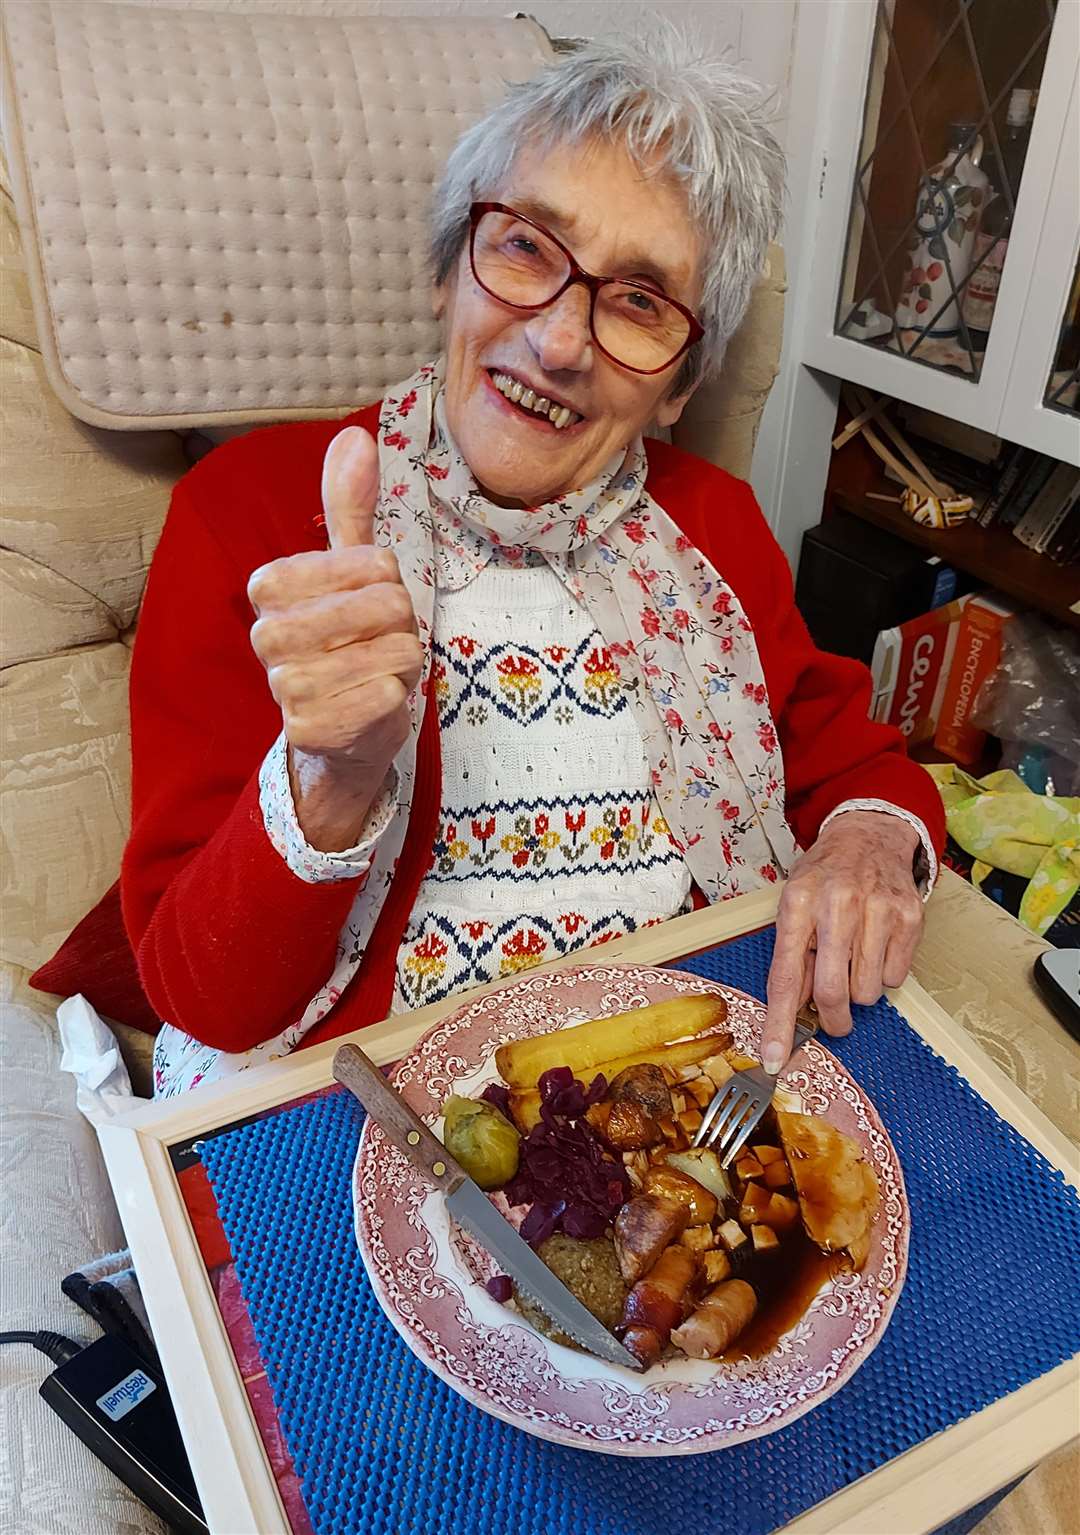 June Taylor, Tongue, gives a thumbs up to her Christmas dinner.